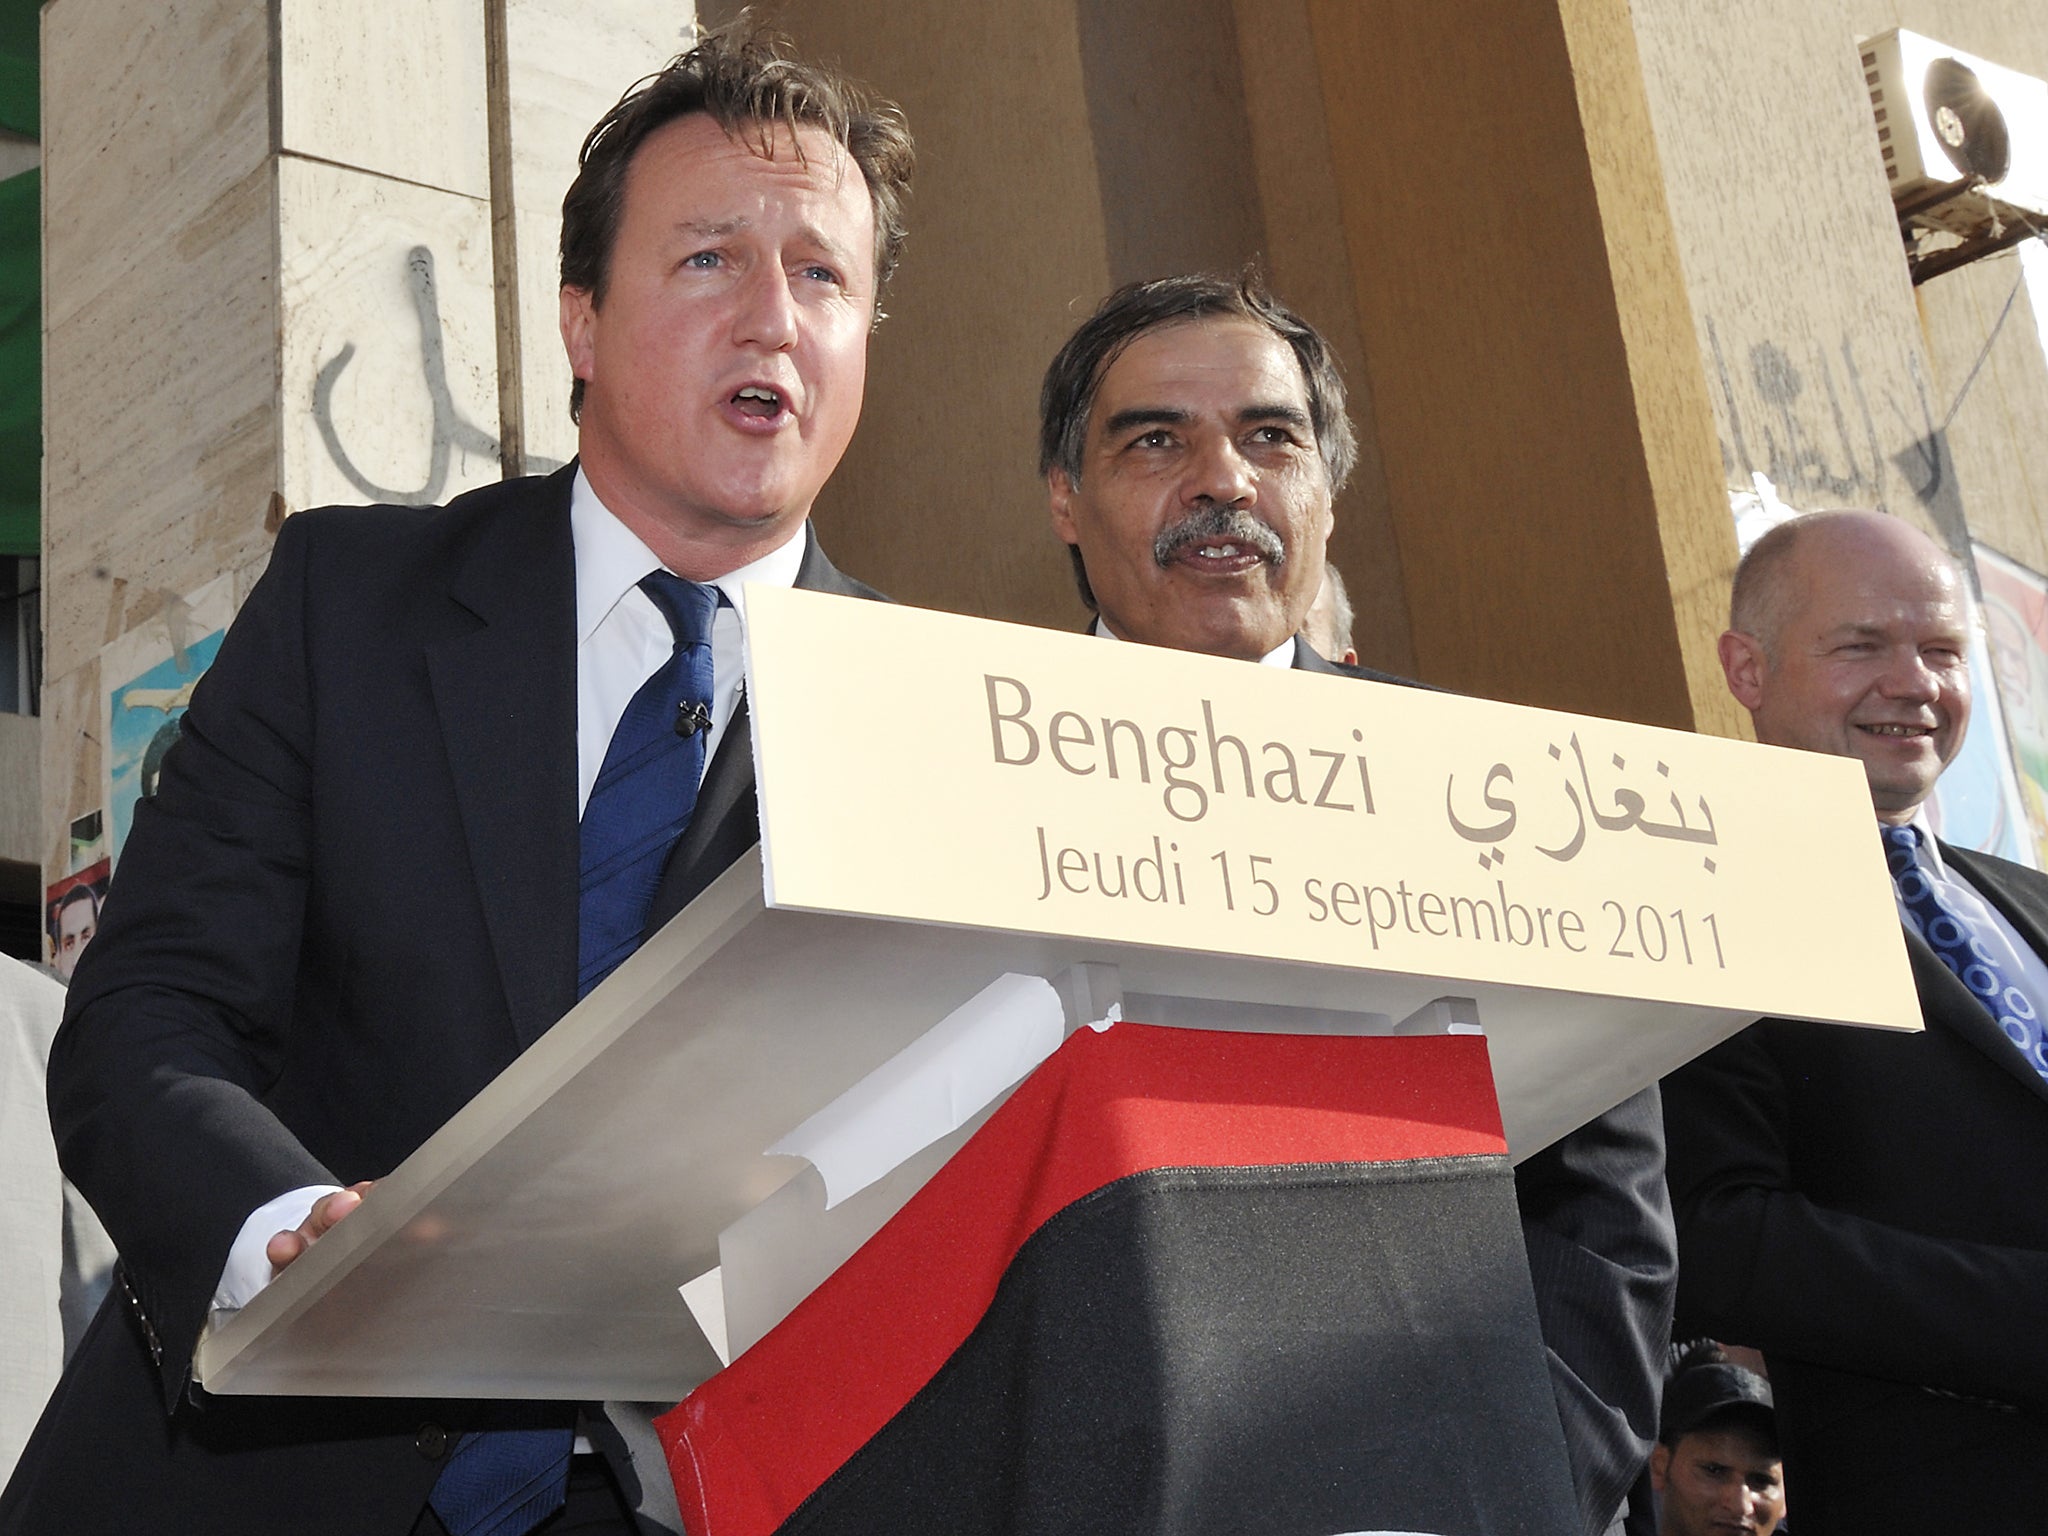 ‘S*** show’: David Cameron told Libyans in 2011, “Britain and France will stand with you as you build your country and build your democracy” following an intervention that was criticised by Barack Obama